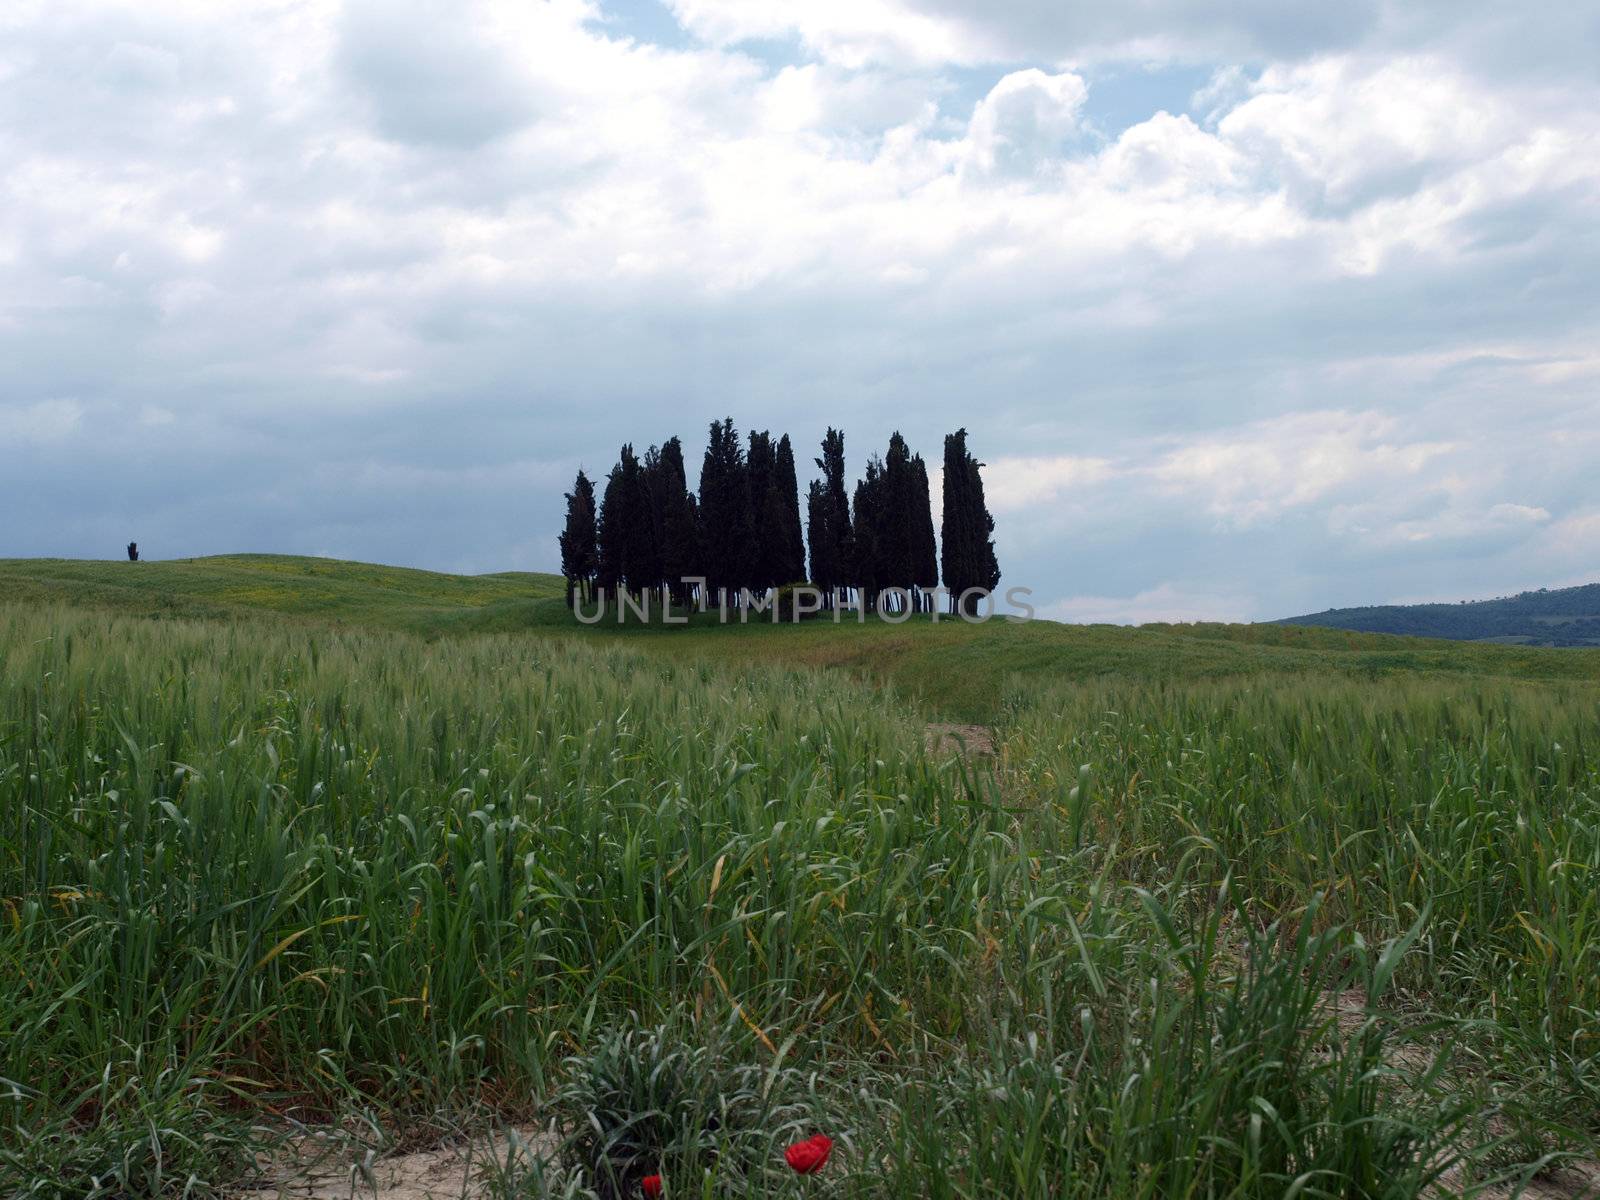 The landscape of the Val d’Orcia. by wjarek